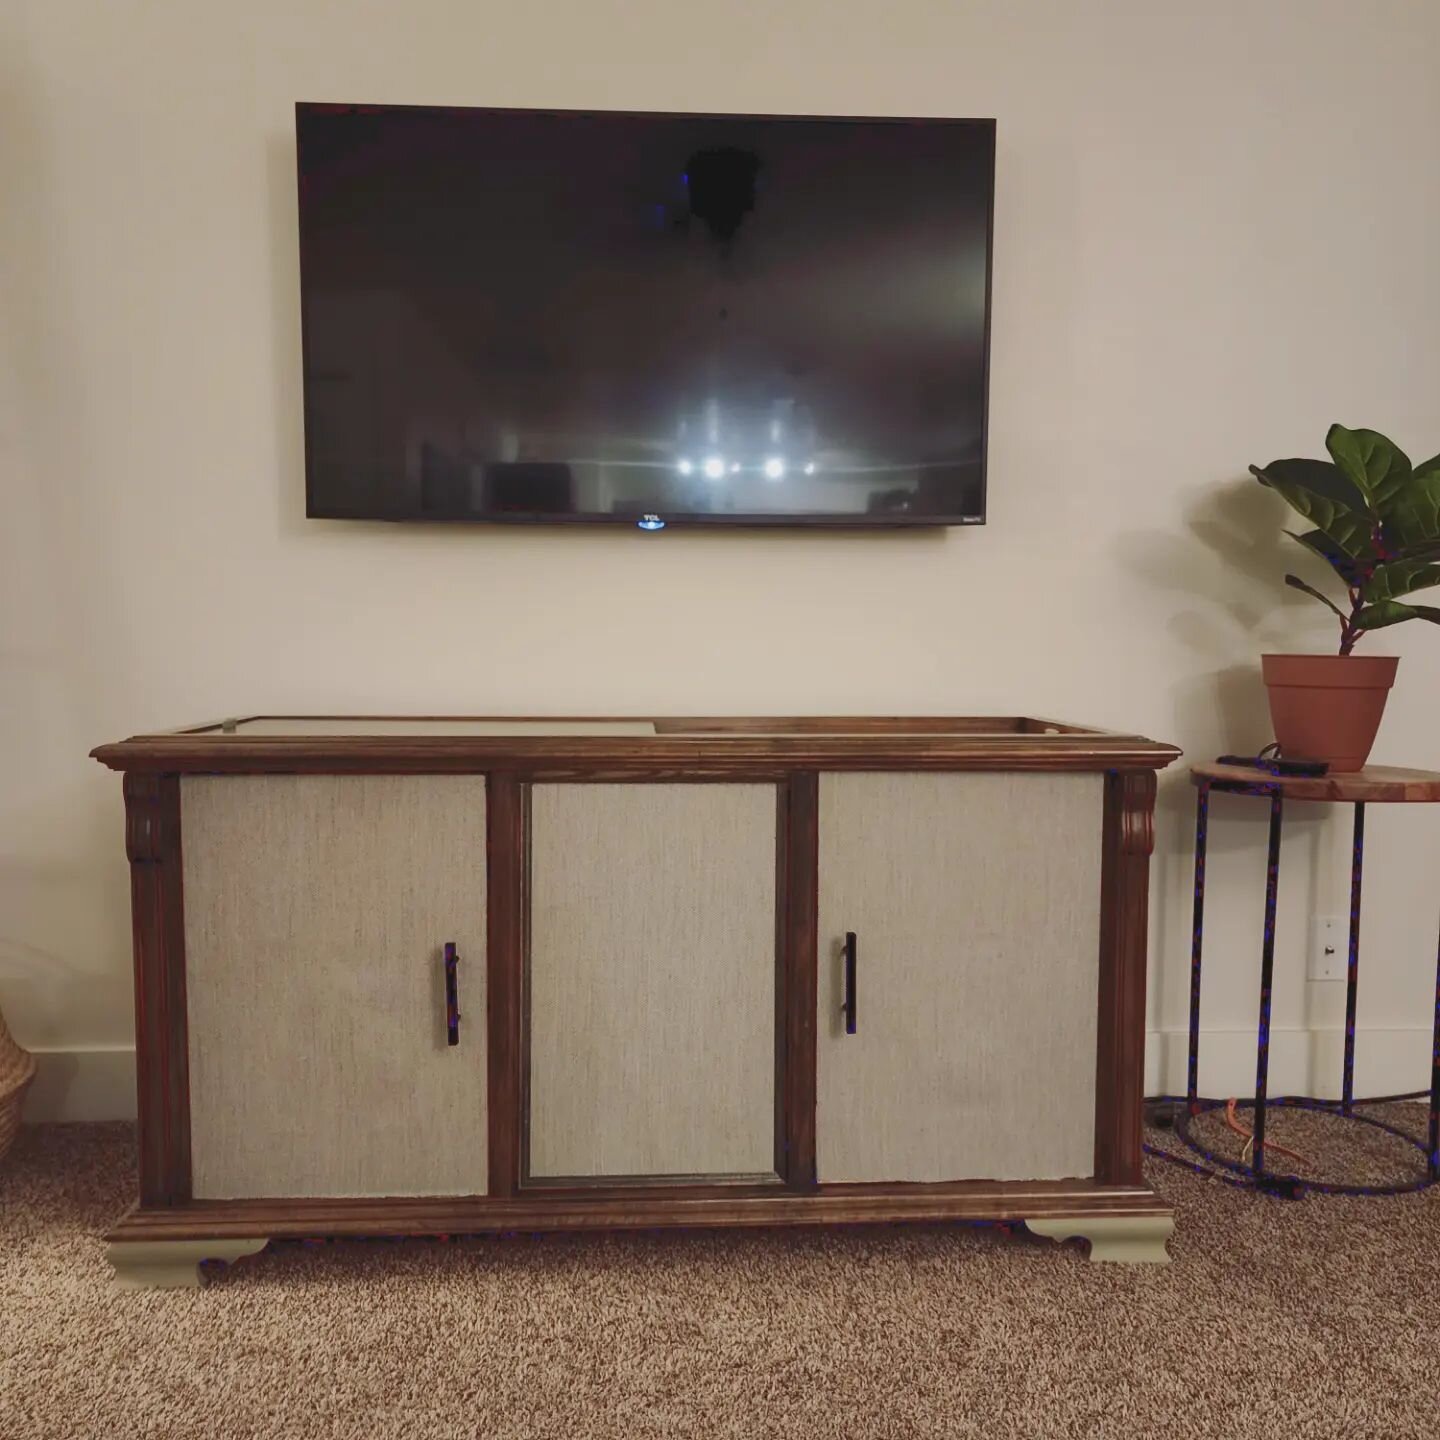 It has taken MONTHS of work for this. It all started when I couldn't stand the original cabinet that MaKell brought home and took out all the record player guts.

I didn't love the look, nor the smell of the cabinet, since it was stored in a shed wit